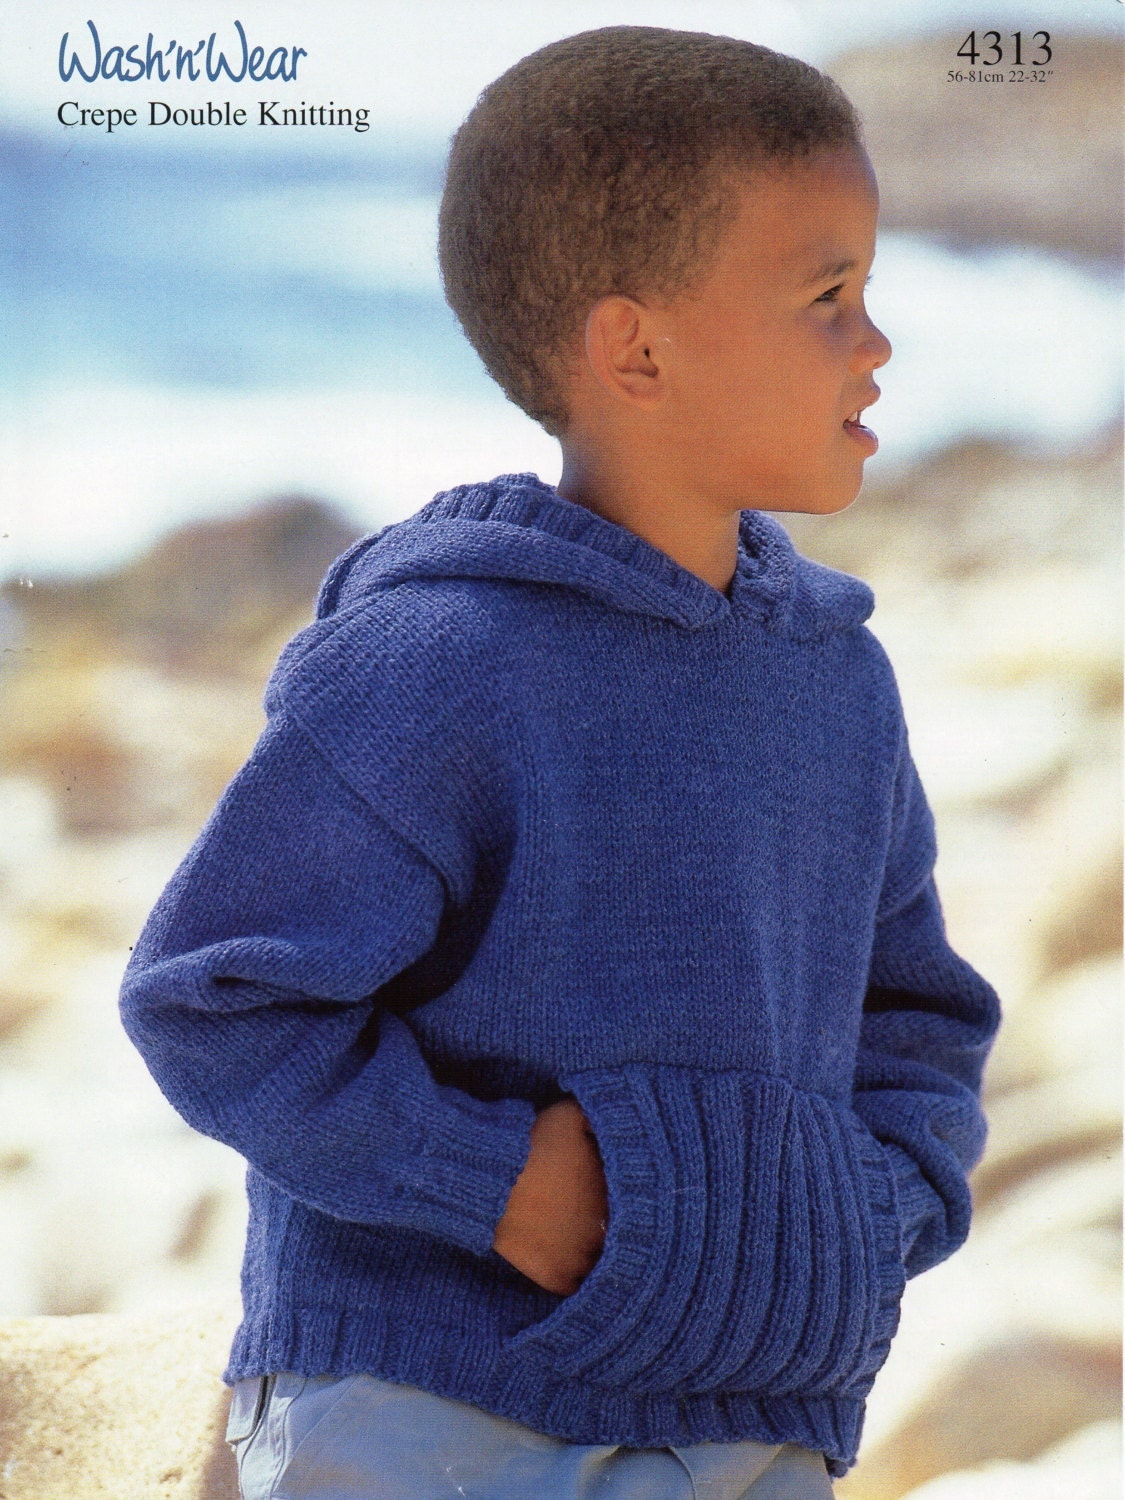 Childrens Hooded Sweater Knitting Pattern Hooded Jumper Front